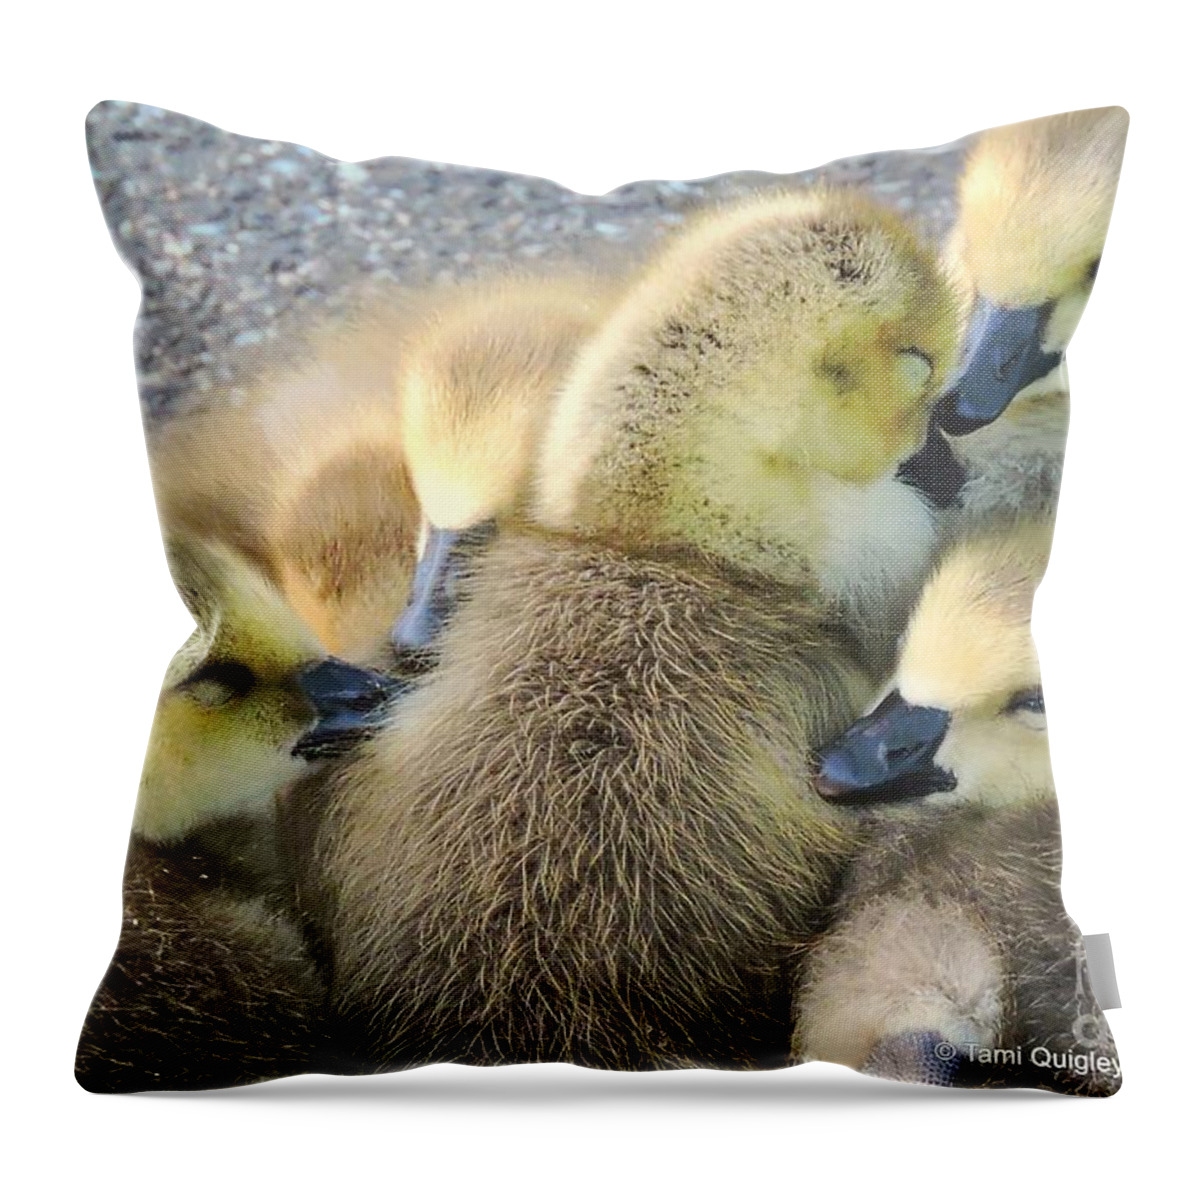 Goslings Throw Pillow featuring the photograph Love Is All Around by Tami Quigley